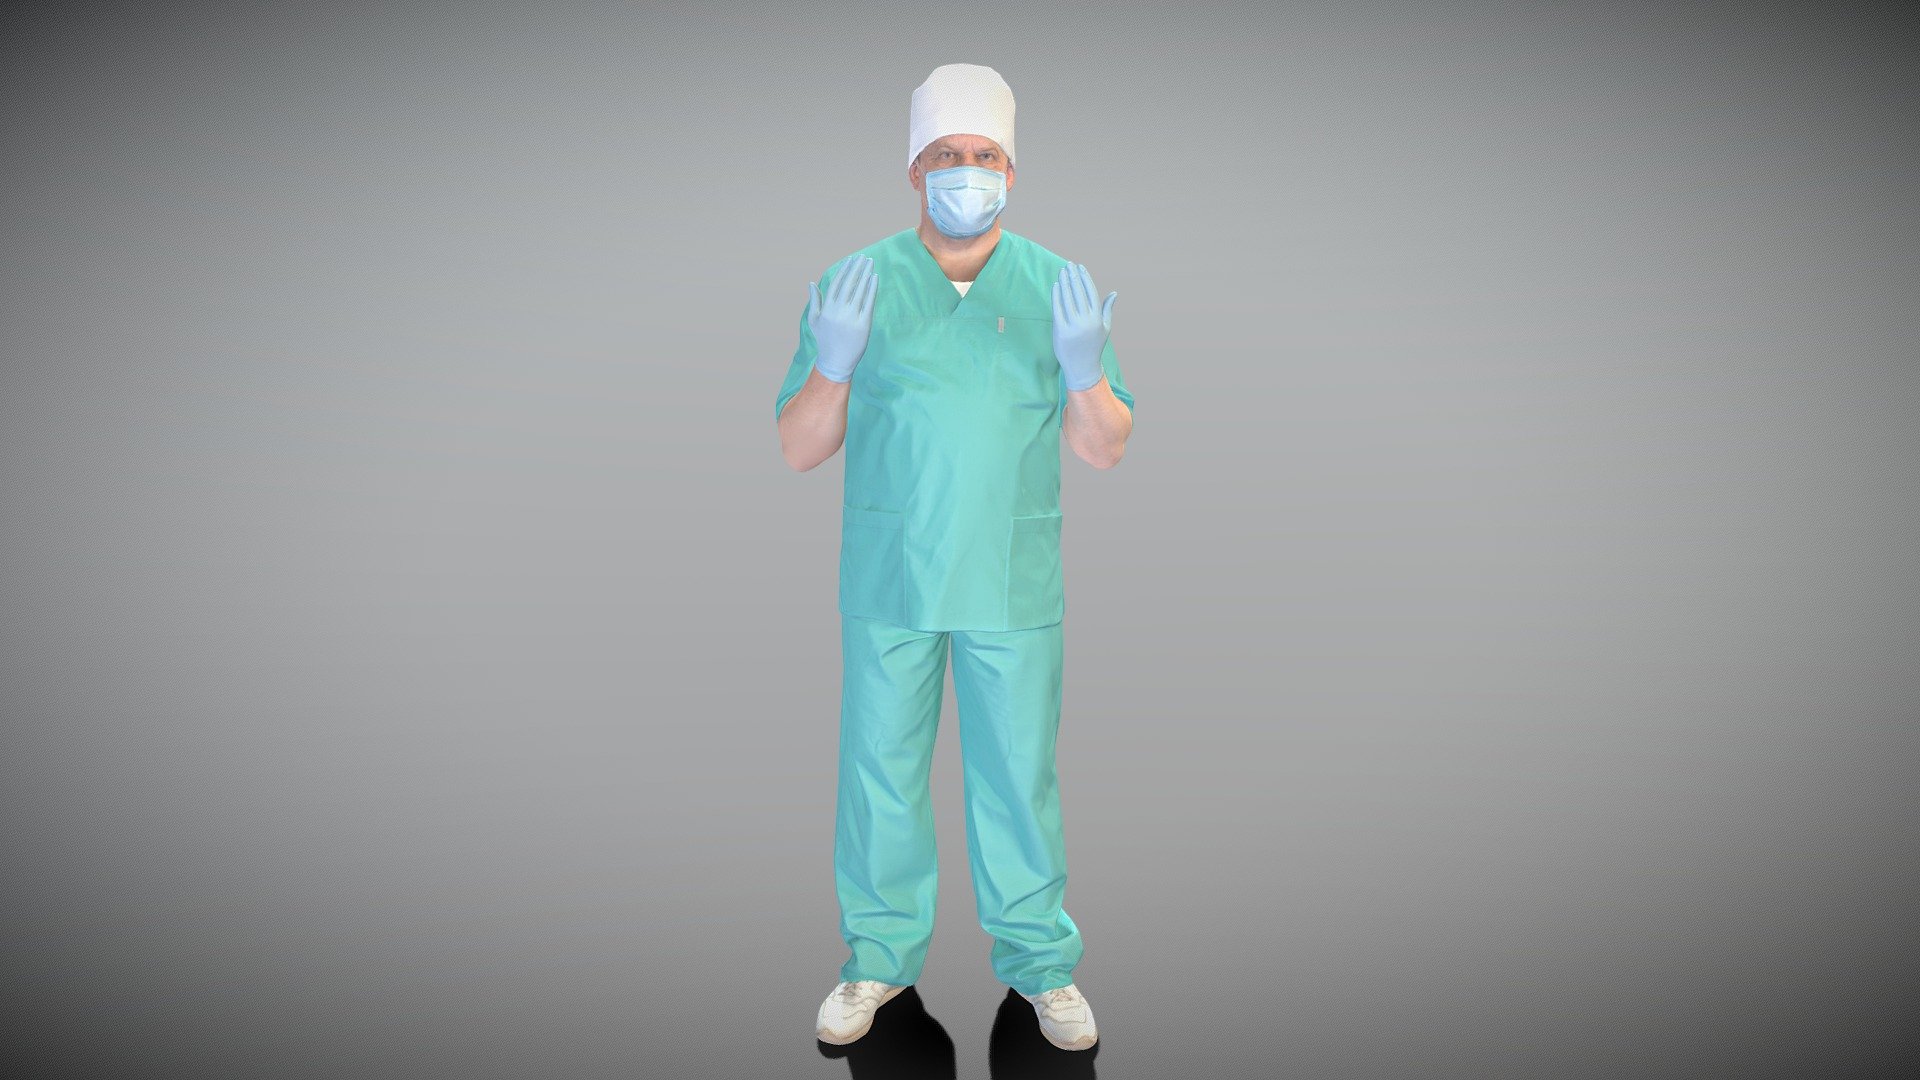 This is a true human size and detailed model of an adult man of Caucasian appearance dressed in a surgical uniform. The model is captured in typical professional pose to perfectly match a variety of architectural and product visualizations, be used as a background or mid-sized character in advert banners, professional products/devices presentations, educational tutorials, etc.

Technical characteristics:




digital double 3d scan model

decimated model (100k triangles)

sufficiently clean

PBR textures: Diffuse, Normal, Specular maps

non-overlapping UV map

Download package includes Cinema 4D project file with Redshift shader, OBJ, FBX files, which are applicable for 3ds Max, Maya, Unreal Engine, Unity, Blender, etc. All the textures included into the main archive.

BONUSE: in this package you will also get a high-poly (.ztl tool) clean and retopologized automatically via ZRemesher 3d model in zBrush, thus youll be able to make your own editing of the purchased 3d model.

3D EVERYTHING - Male doctor ready for surgery 349 - Buy Royalty Free 3D model by deep3dstudio 3d model